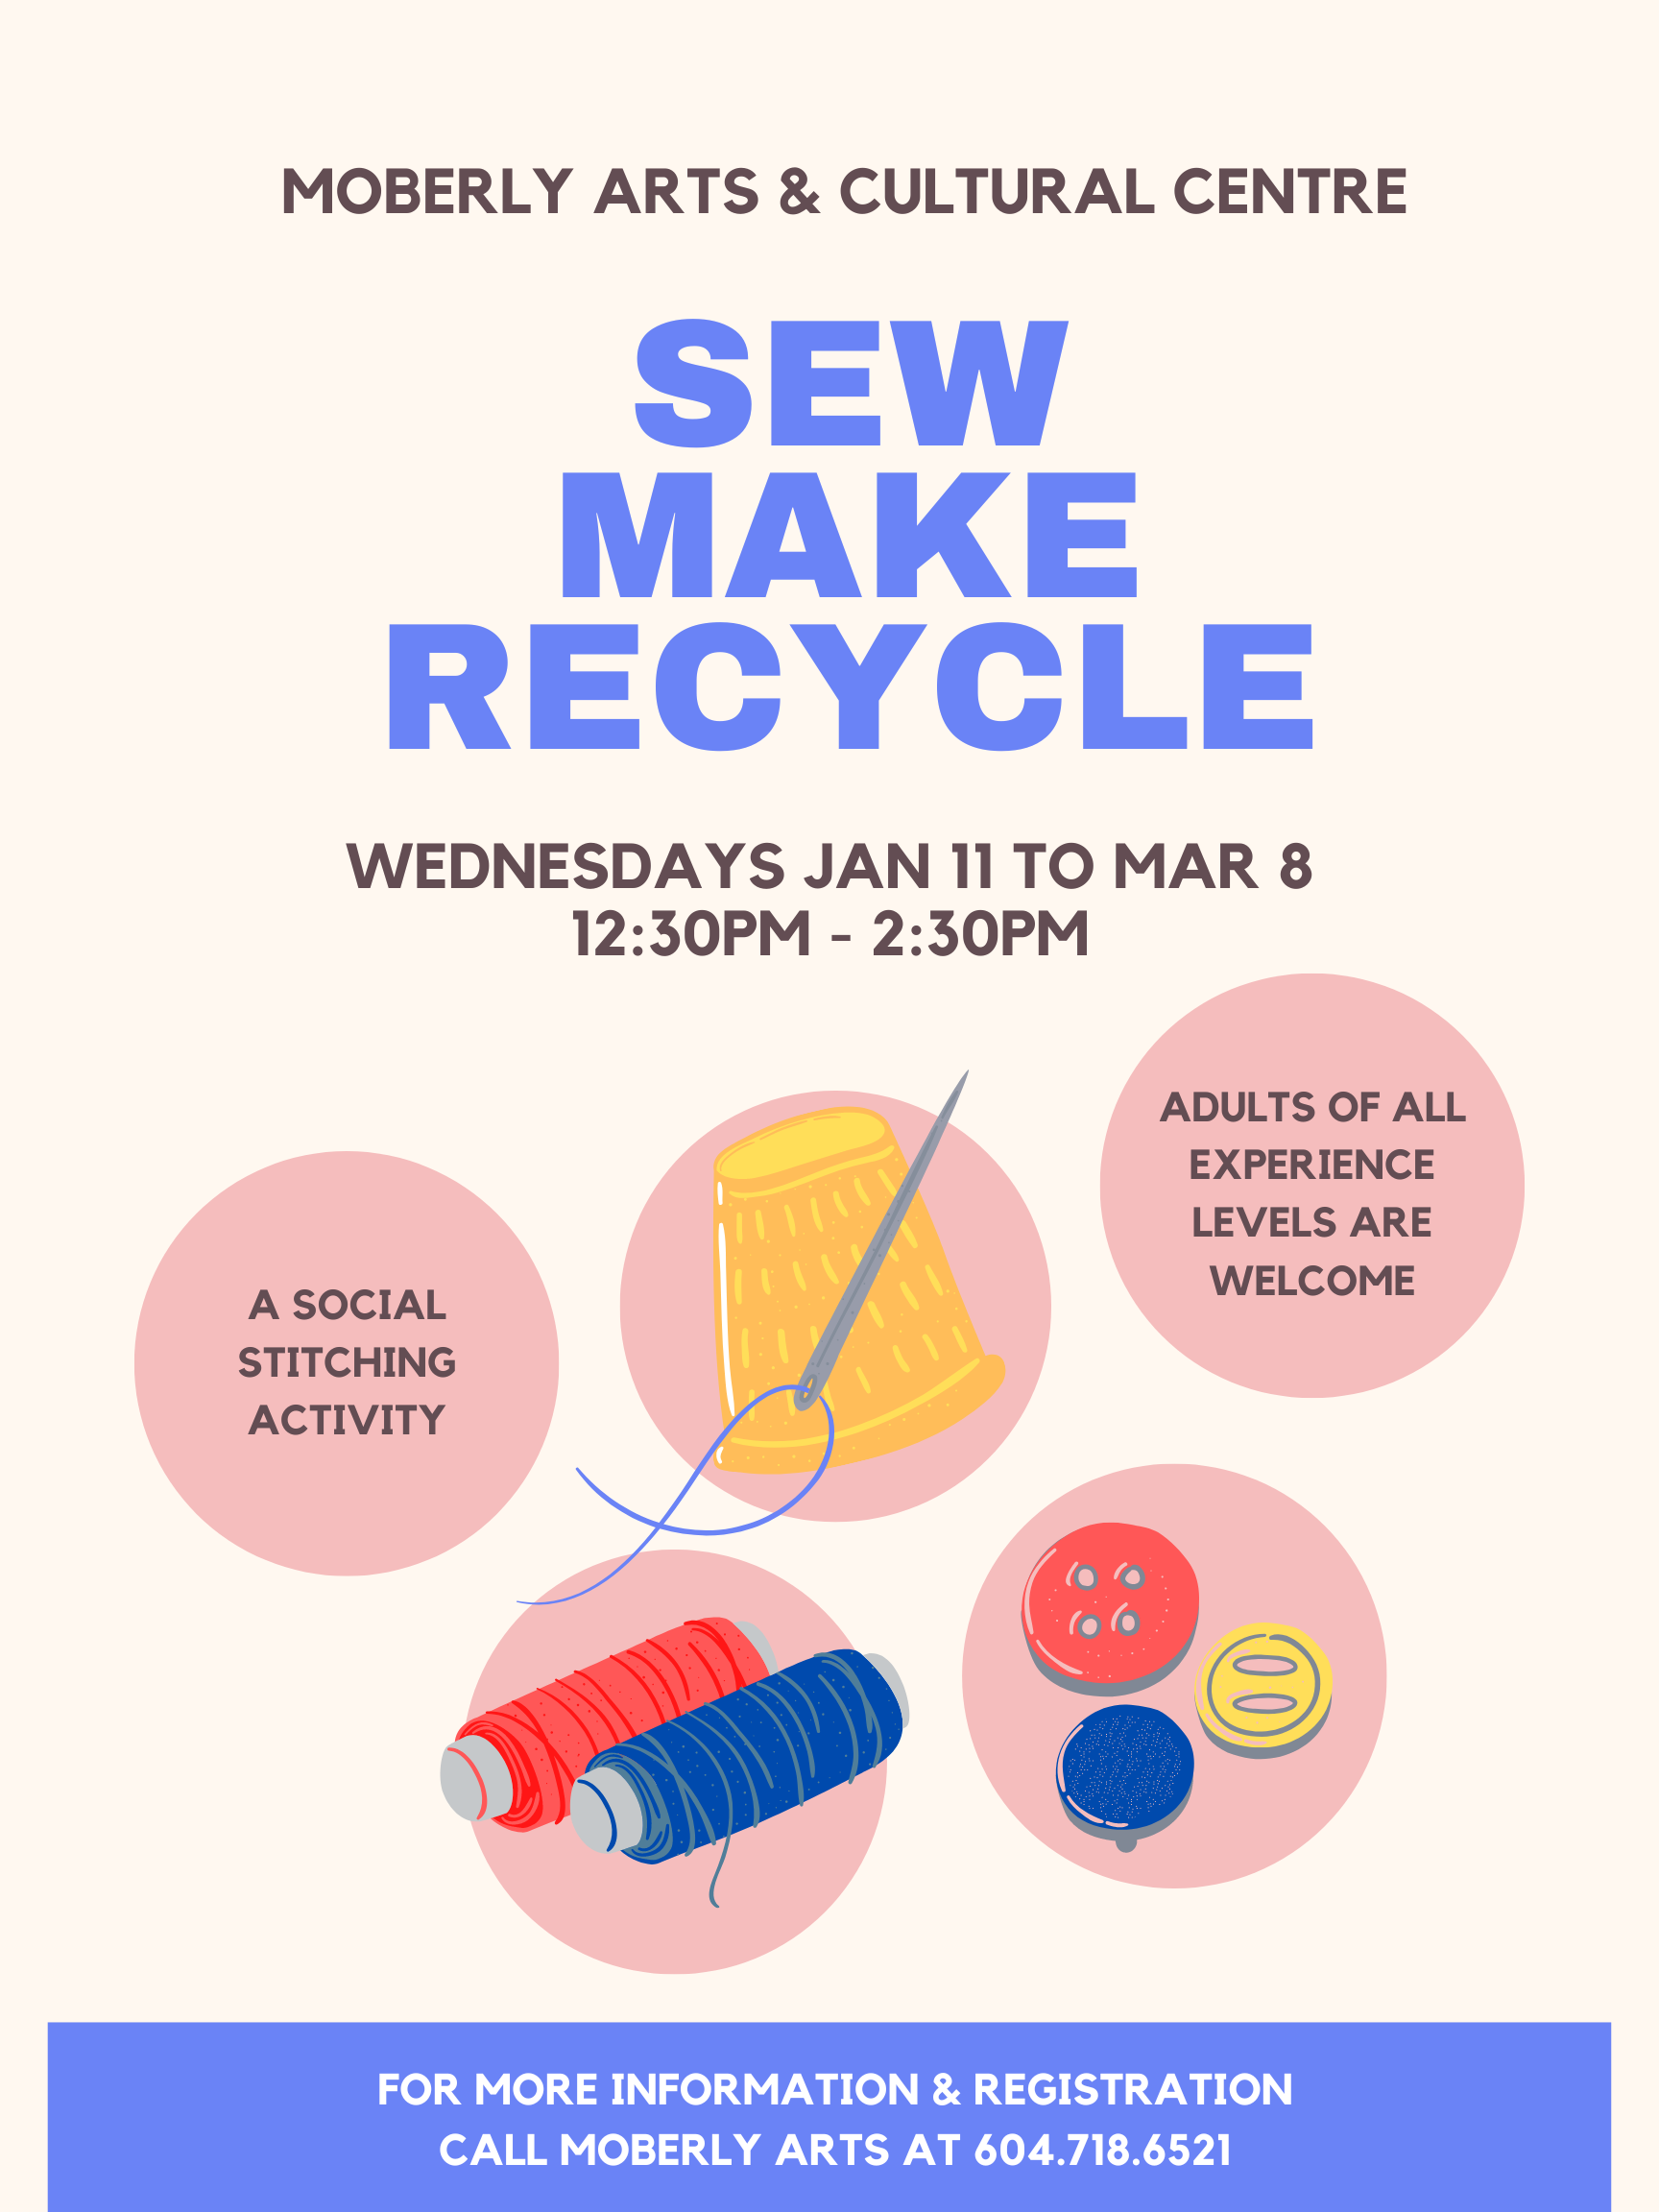 Sew Make Recycle Do you have "stuff" you keep because of the memories things hold for you? Come and spend some social time hand stitching a special container for your memories. No special skills needed. We have lots of cloth and hand sewing supplies to share. If you like, bring some small objects to work with - family photos, small souvenirs, special pieces of cloth or other objects that have personal meaning for you.